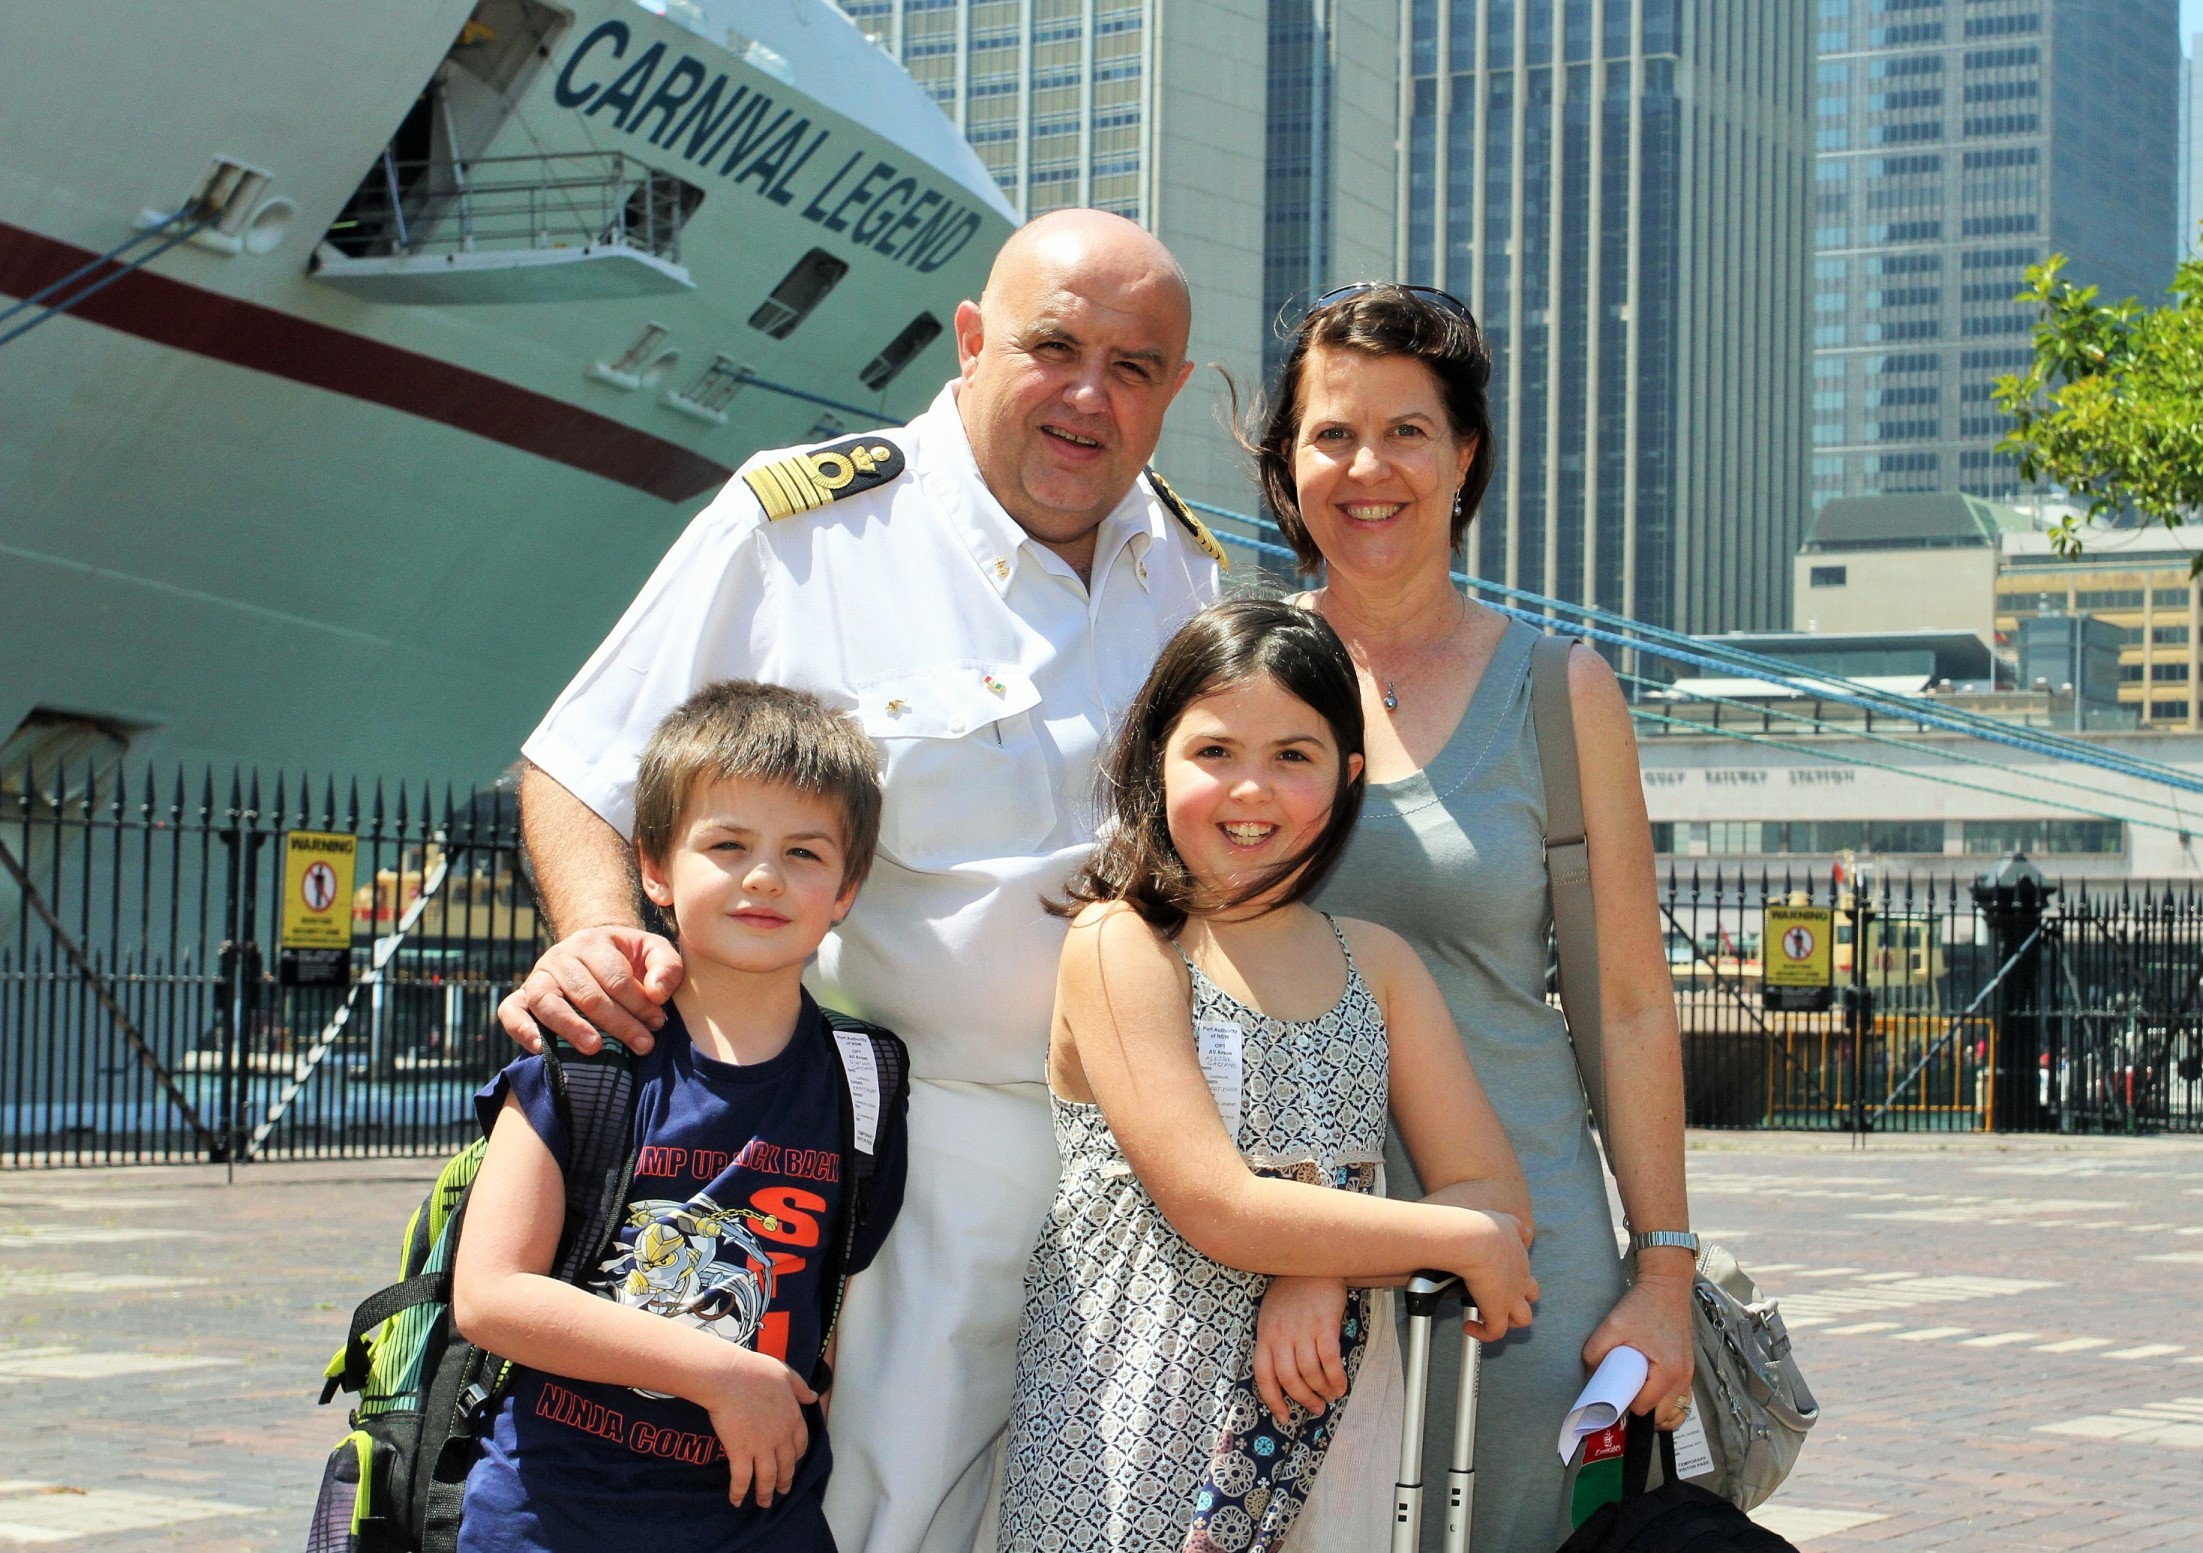 Carnival Legend Captain Guiseppe Gazzano with wife Anne Louise and children Giacomo and Alessia 9